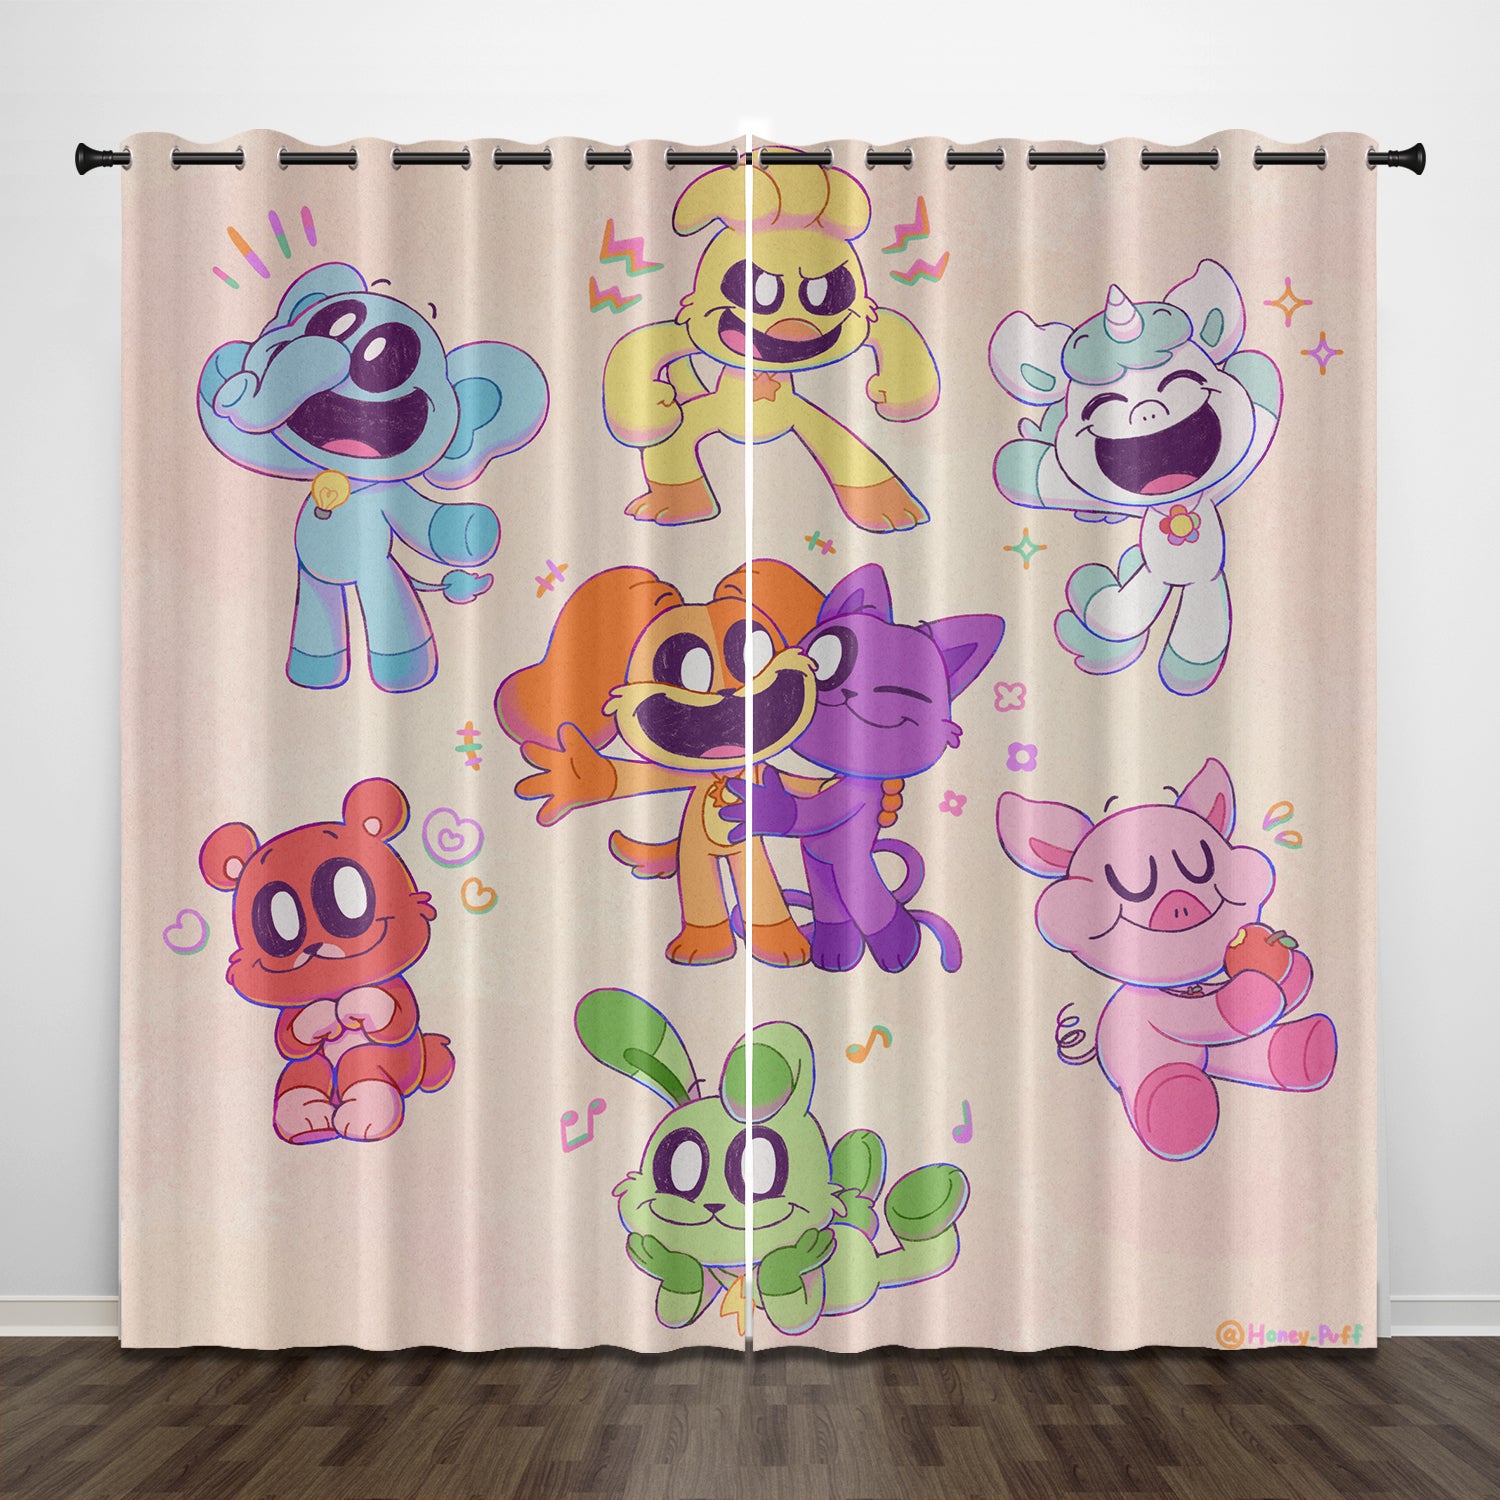 Smiling Critters Blackout Curtains Drapes For Window Treatment Set